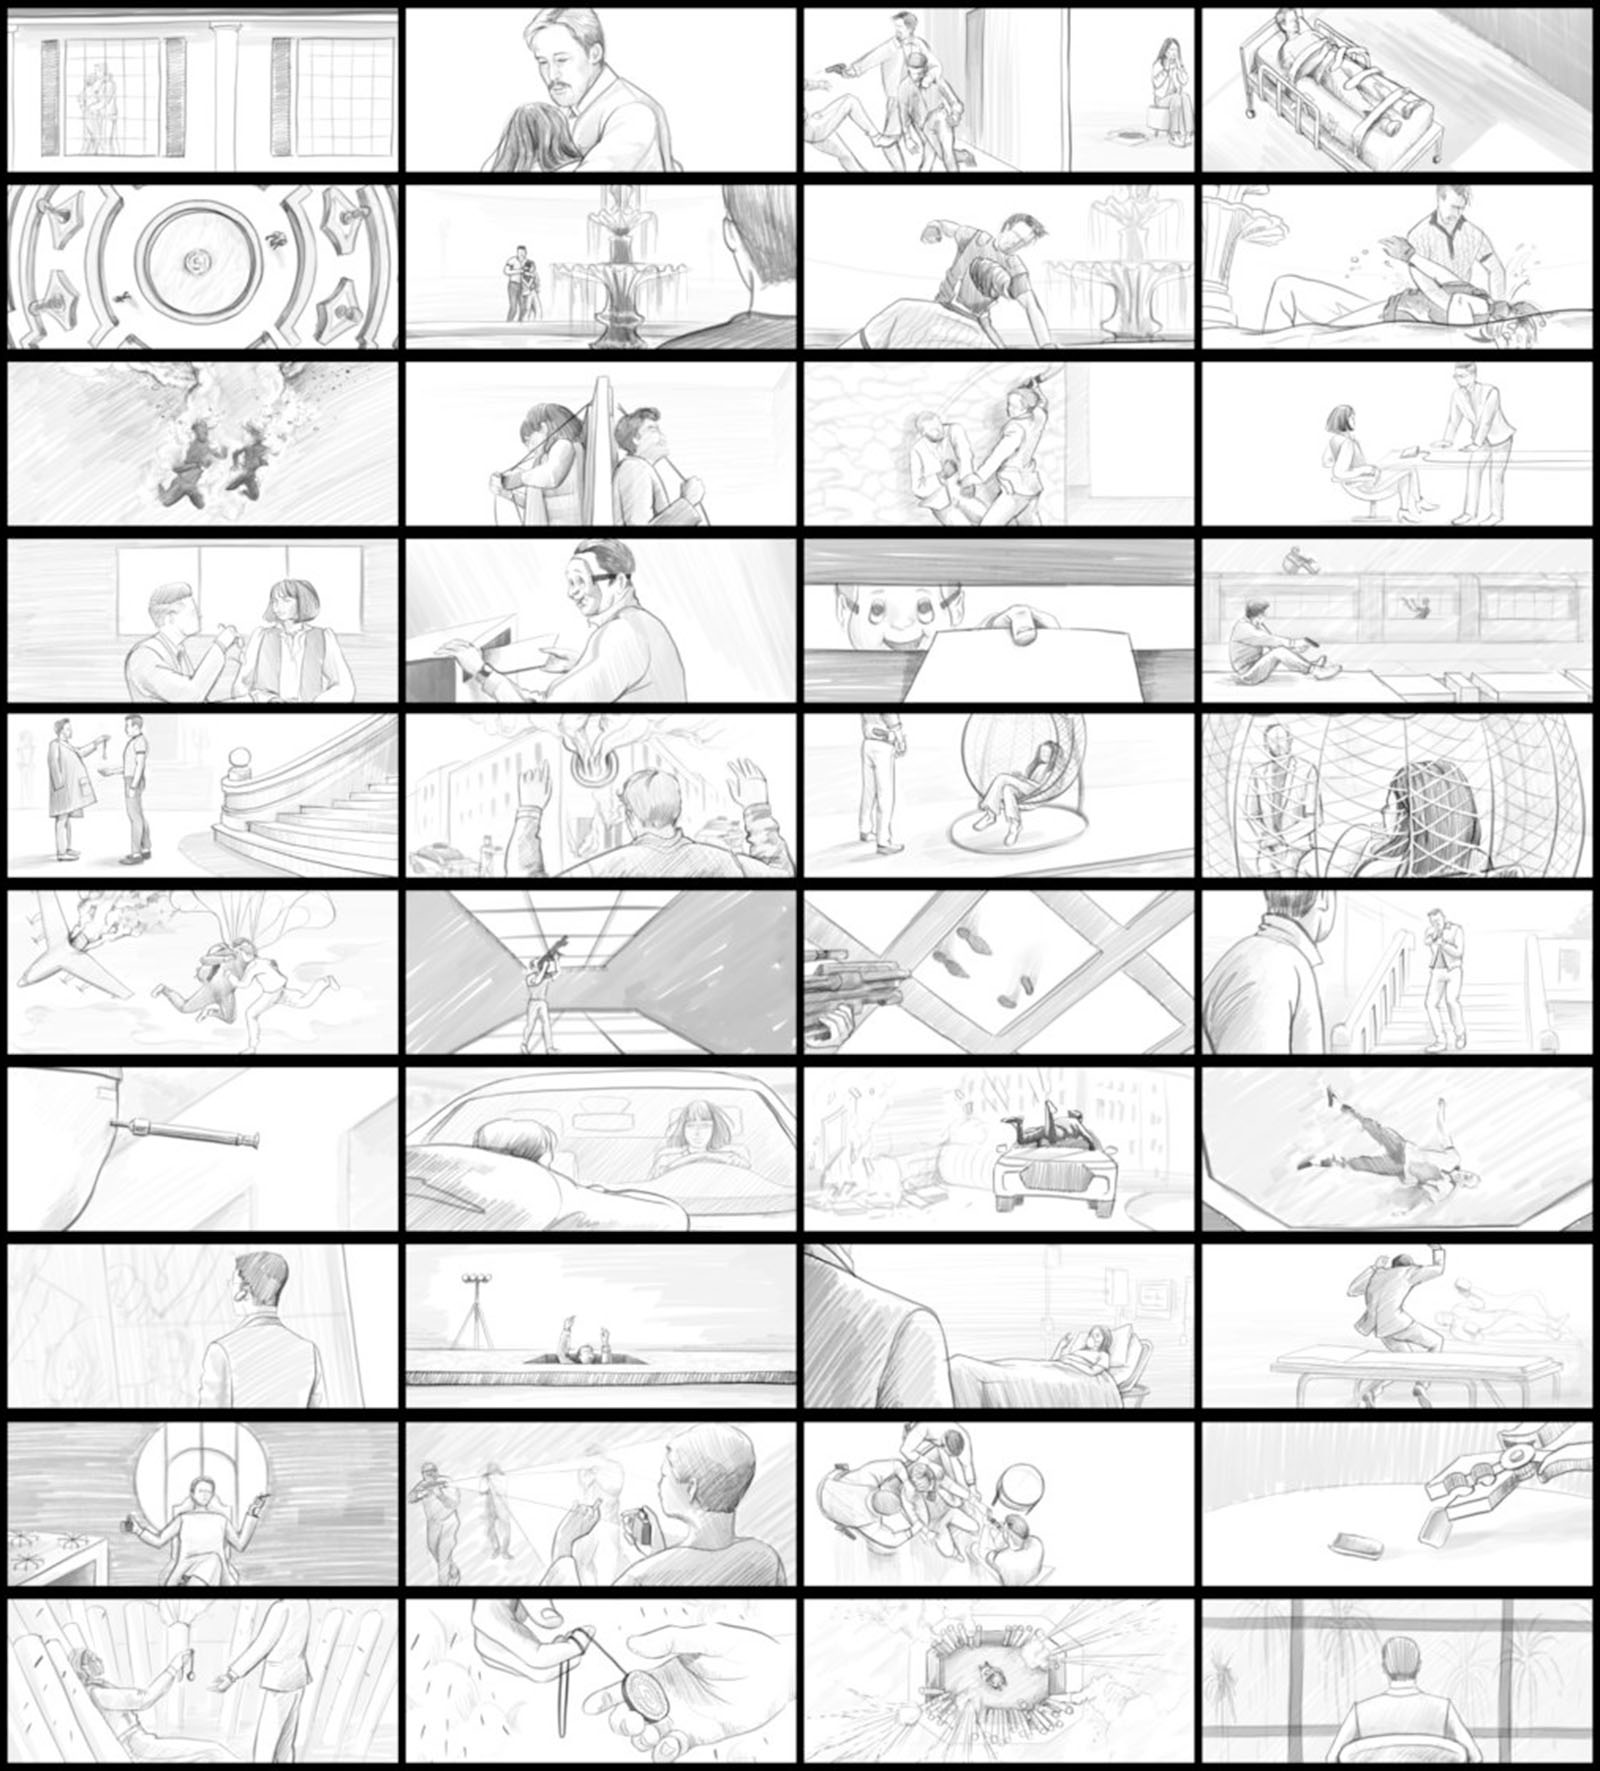 Traditional storyboarding is used to quickly build flow and structure.